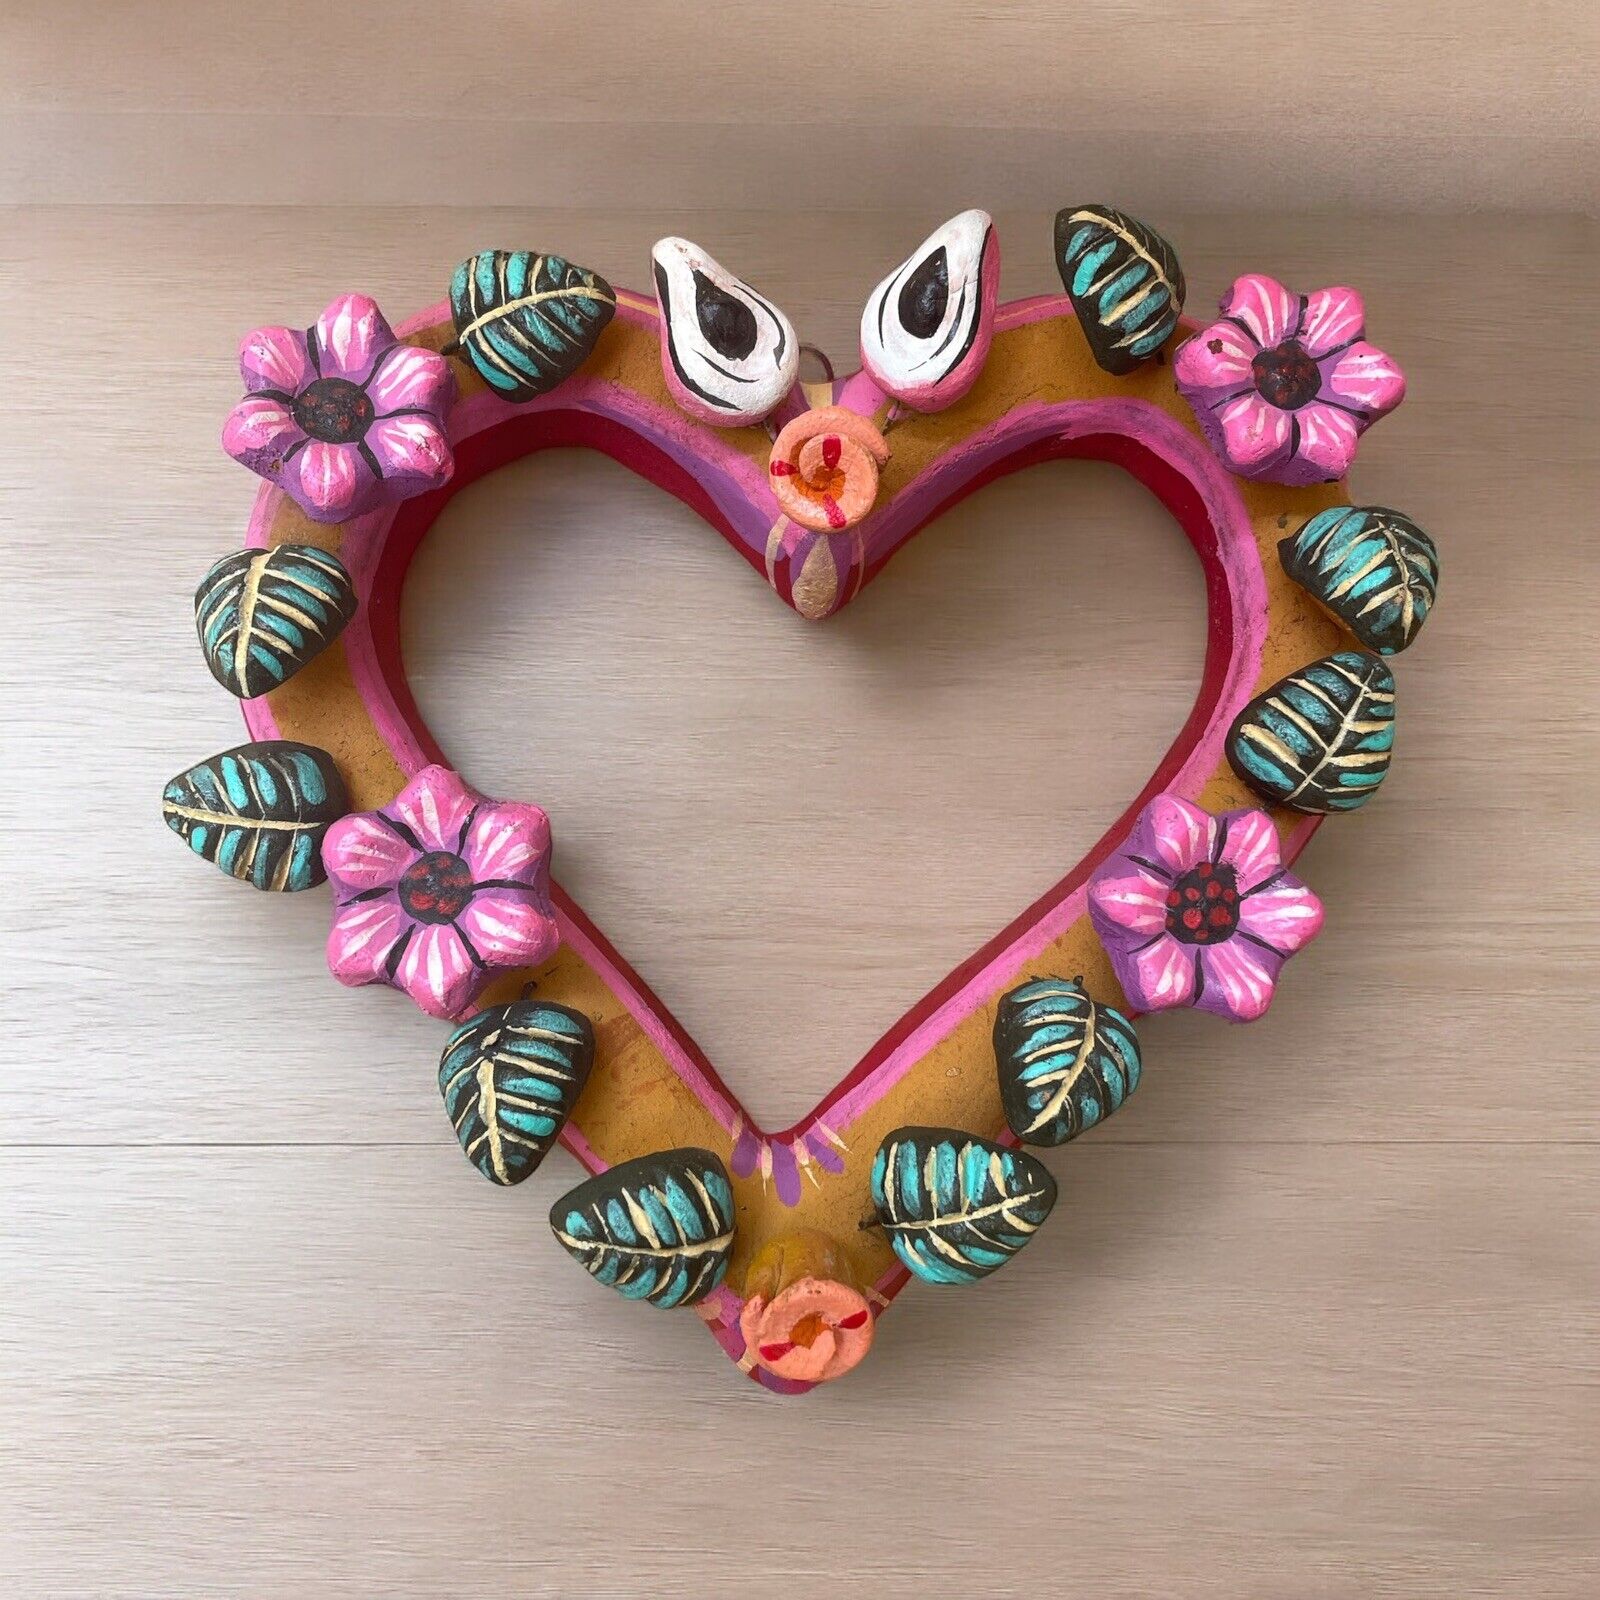 Heart with Flowers Tree of Life Style Handmade Clay Mexico 9 in wide